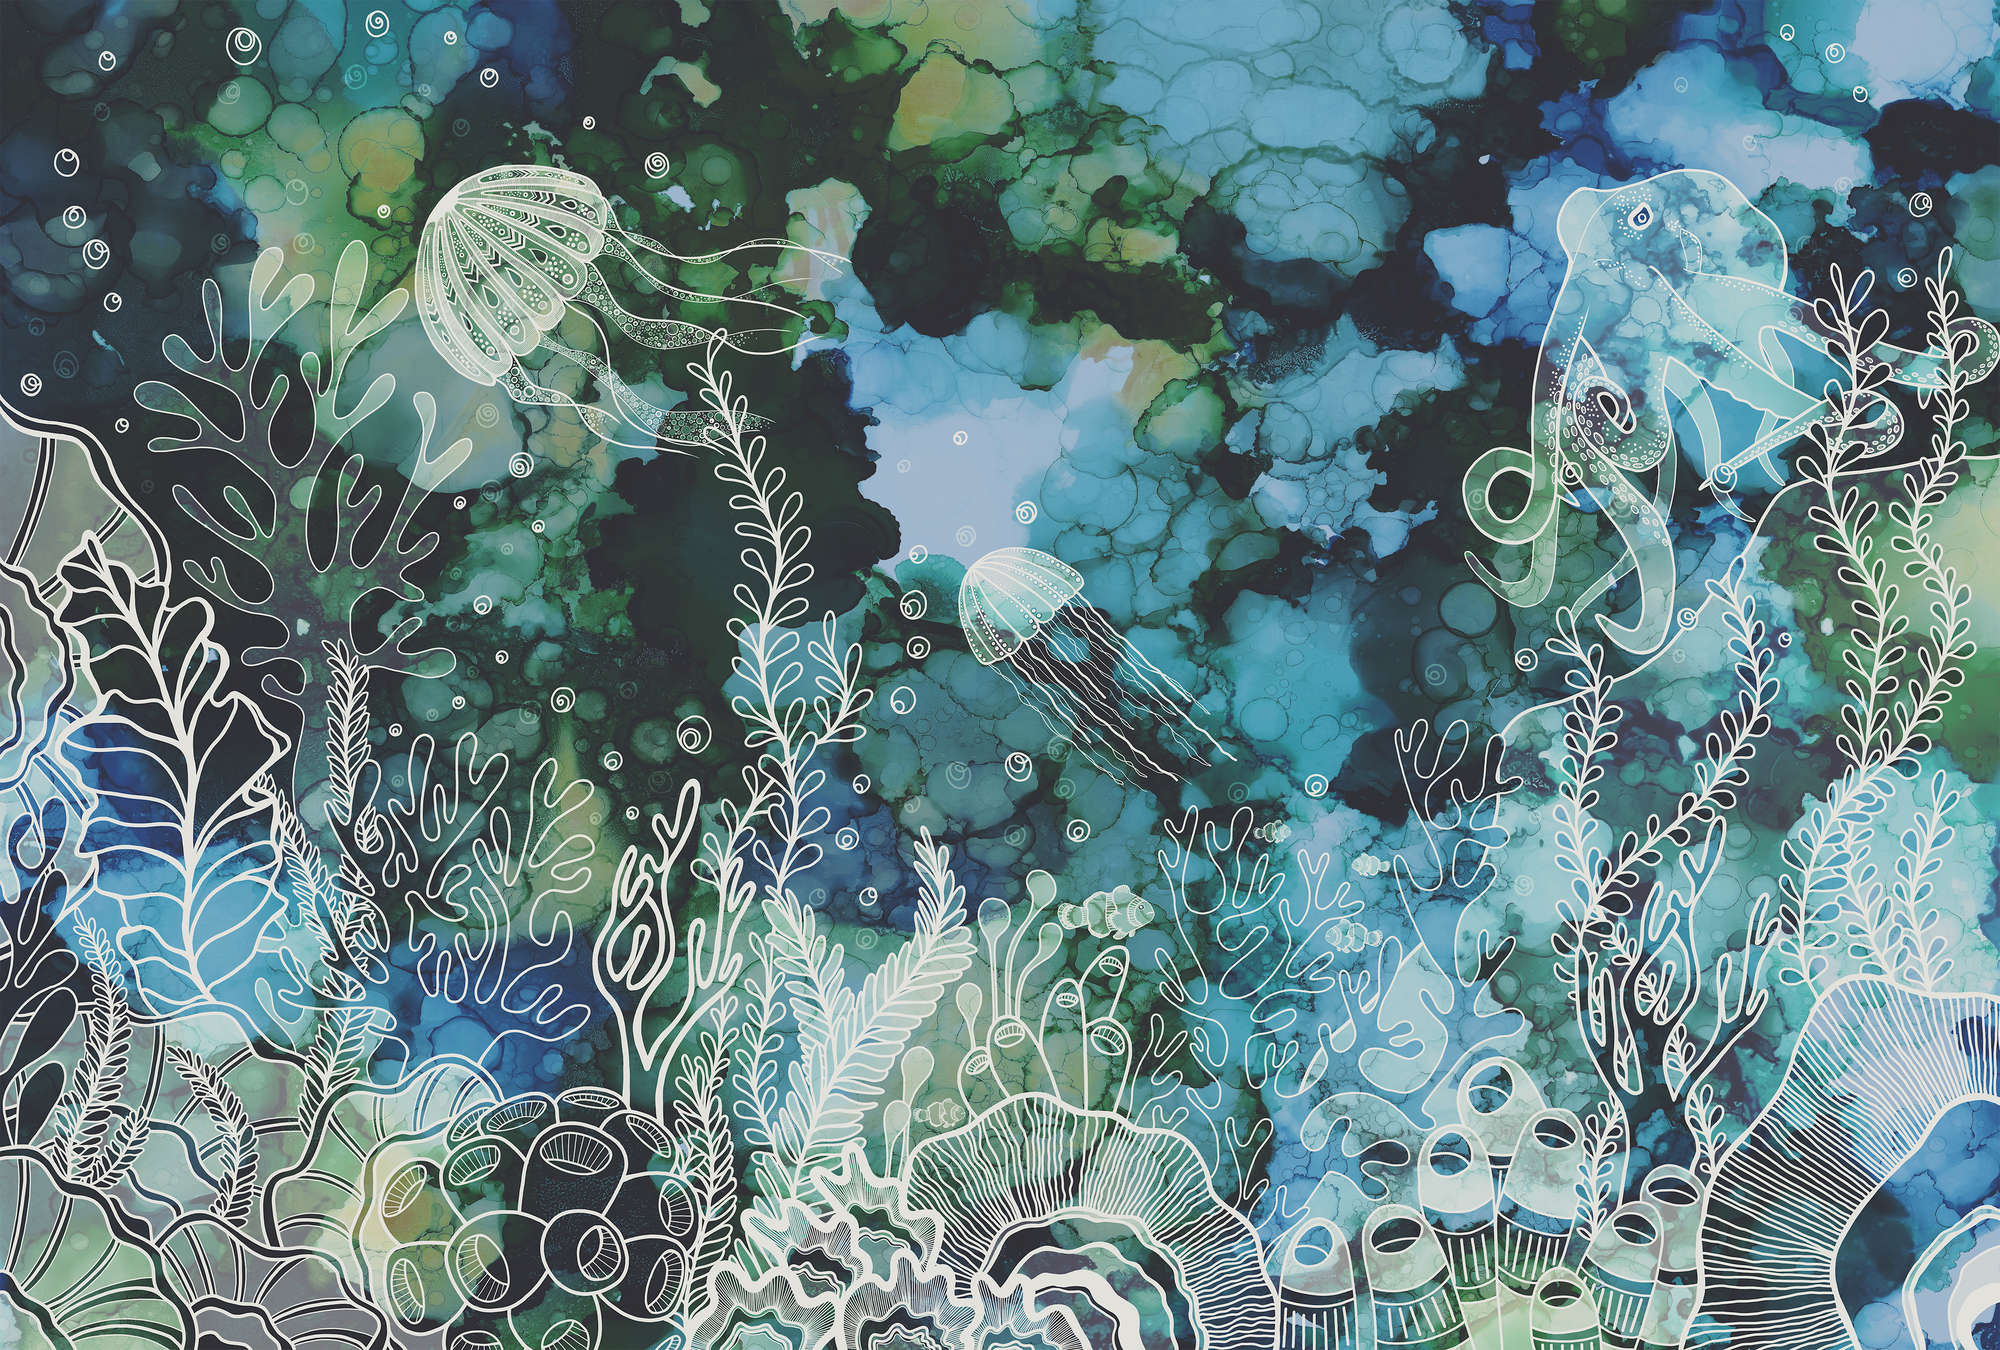             Photo wallpaper with underwater coral reef in acrylic colours
        